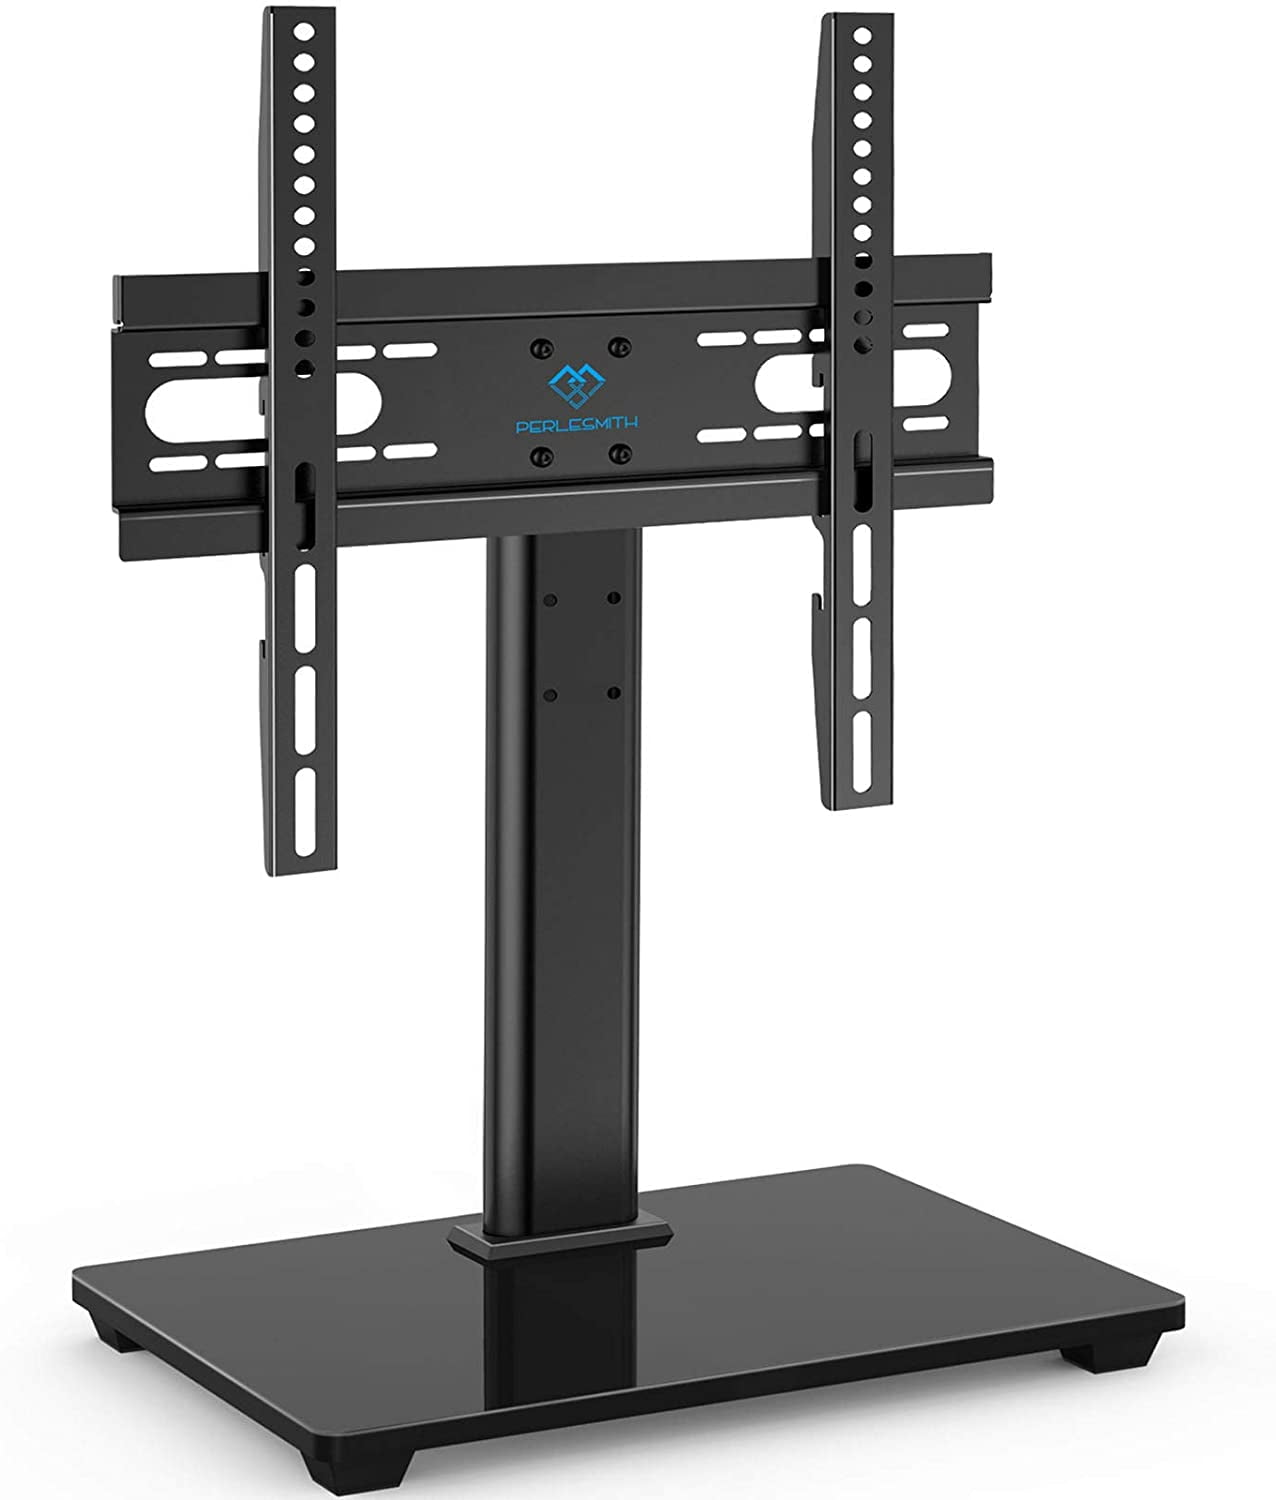 Universal Tabletop TV Stand Base,Adjustable Height TVs Base Mount for 37- 55"  LCD LED TVs